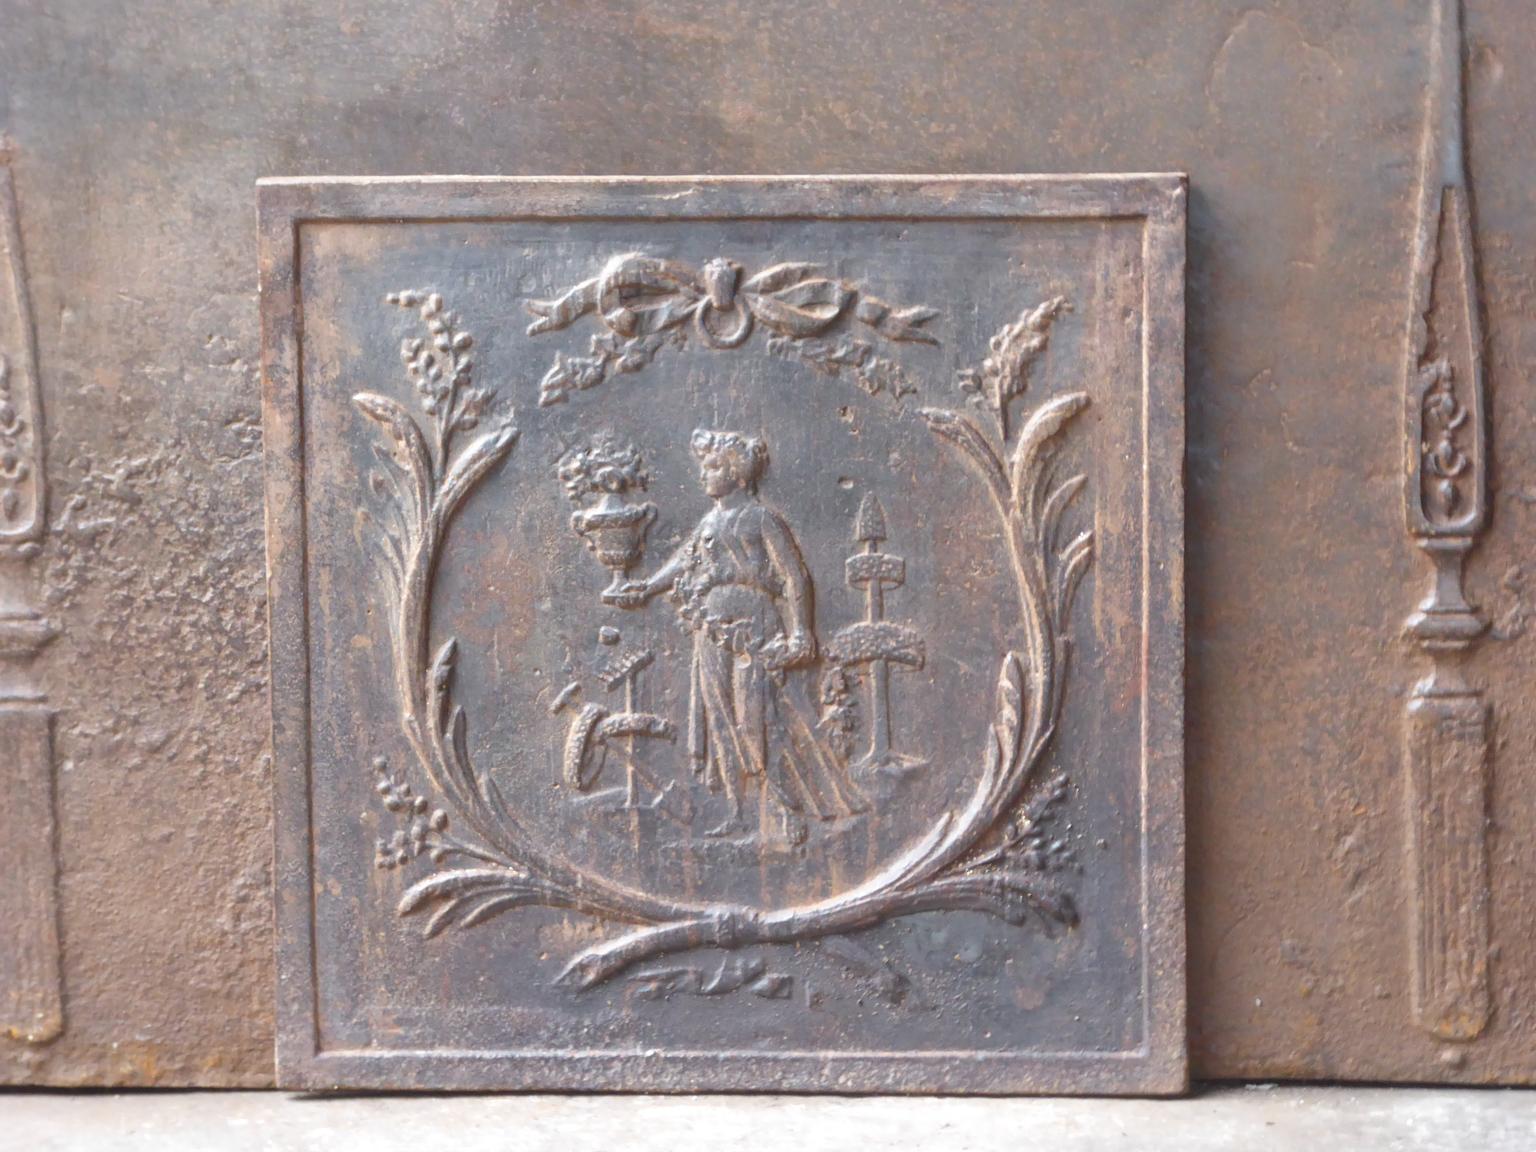 19th century French Napoleon III period fireback with a gardening scene.

The fireback is made of cast iron and has a natural brown patina. Upon request it can be made black / pewter at no extra cost. The fireback is in a good condition. It does not